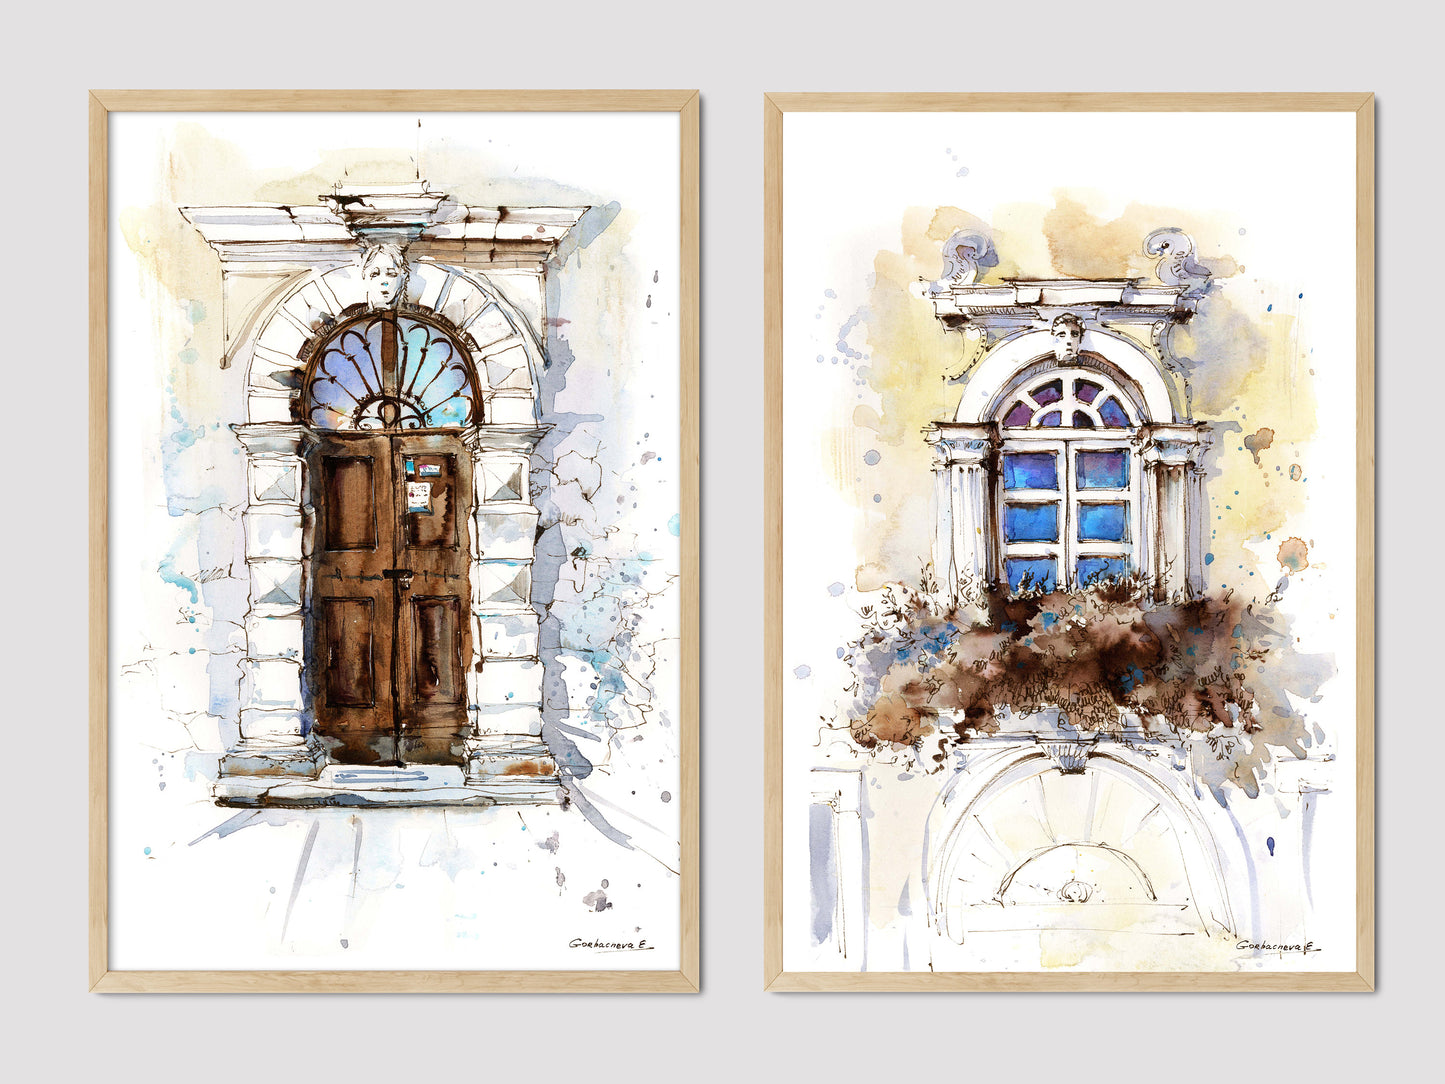 Travel Art Prints Set Of 2, City Scene with Door Window 2 Watercolor Artwork, Gallery Wall, Architecture Painting